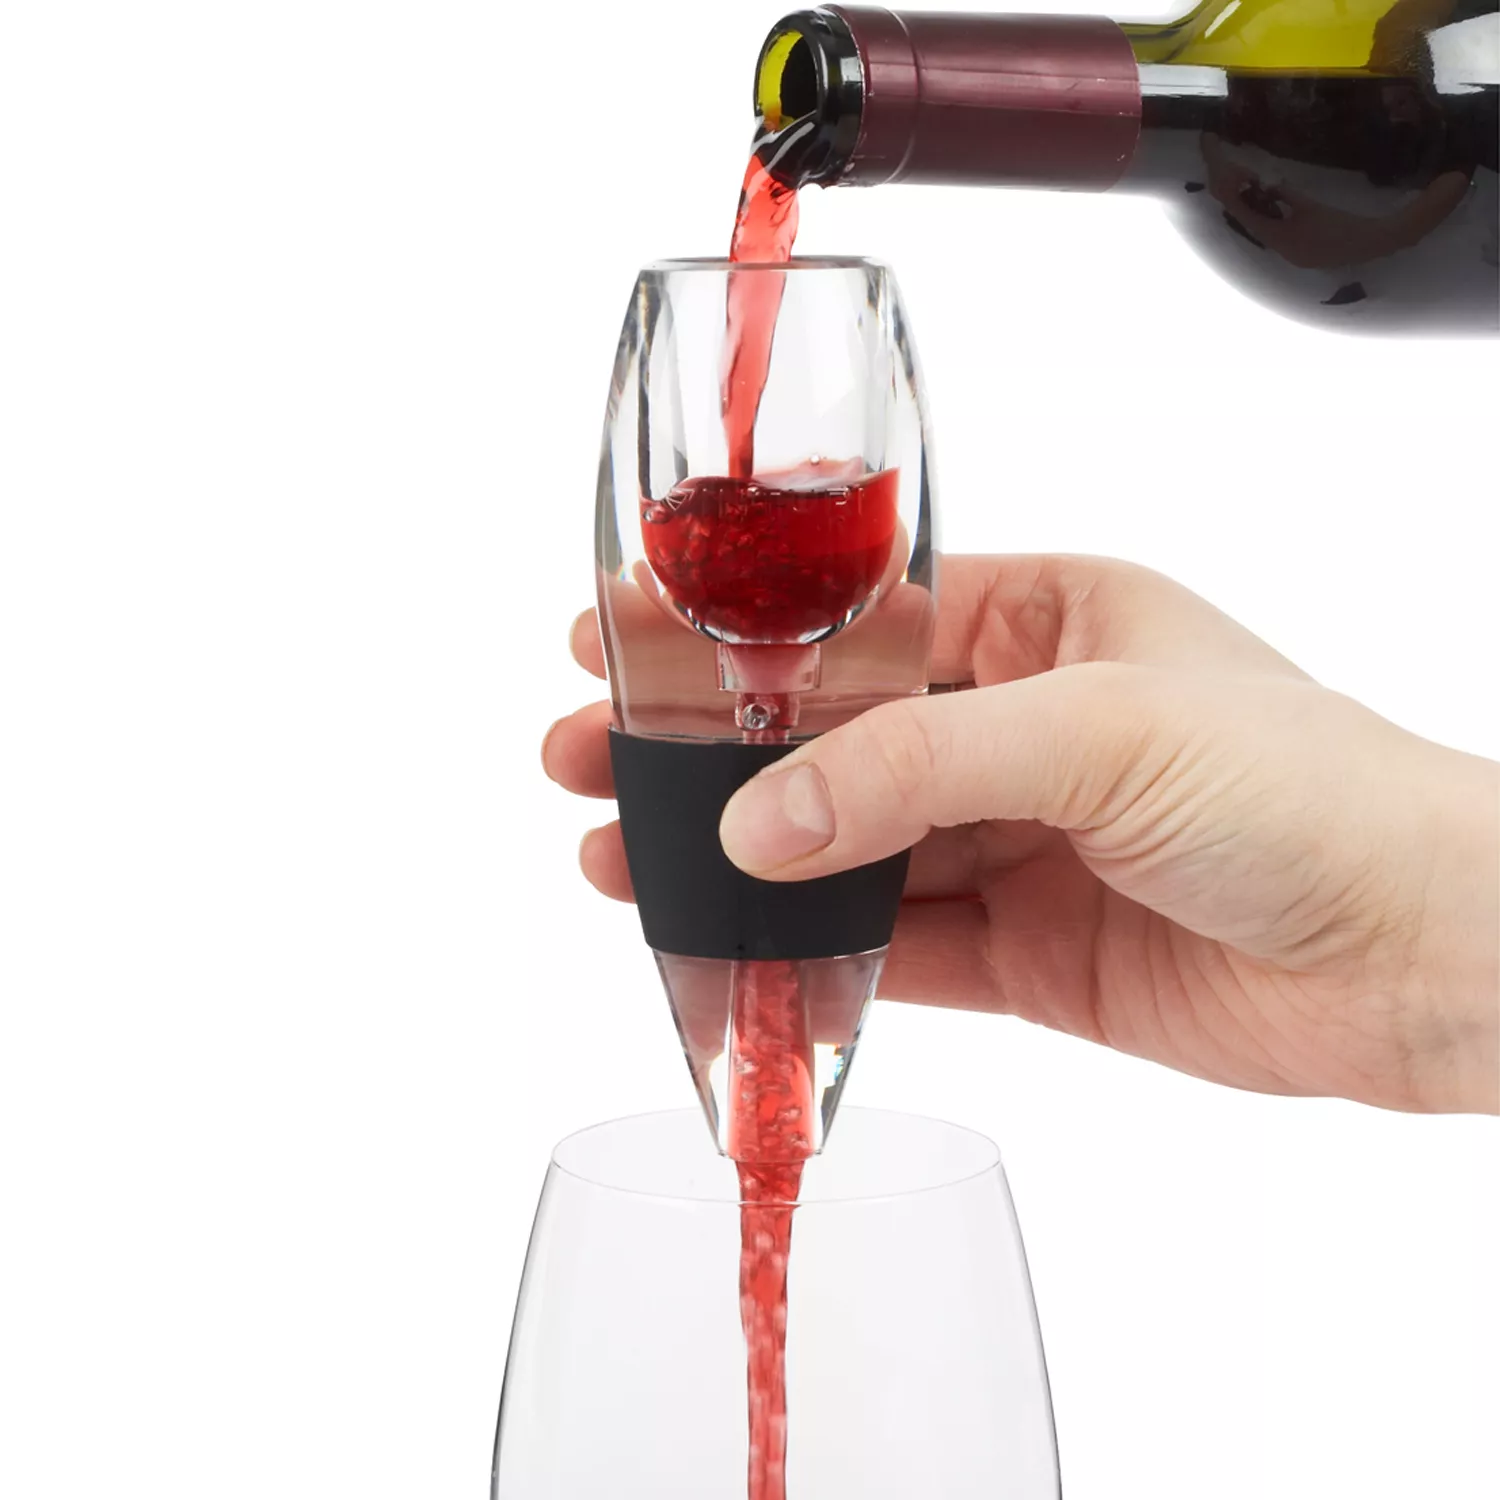 Corkcicle Air 4-in-1 Wine Chiller, Aerator, Pourer, and Stopper 